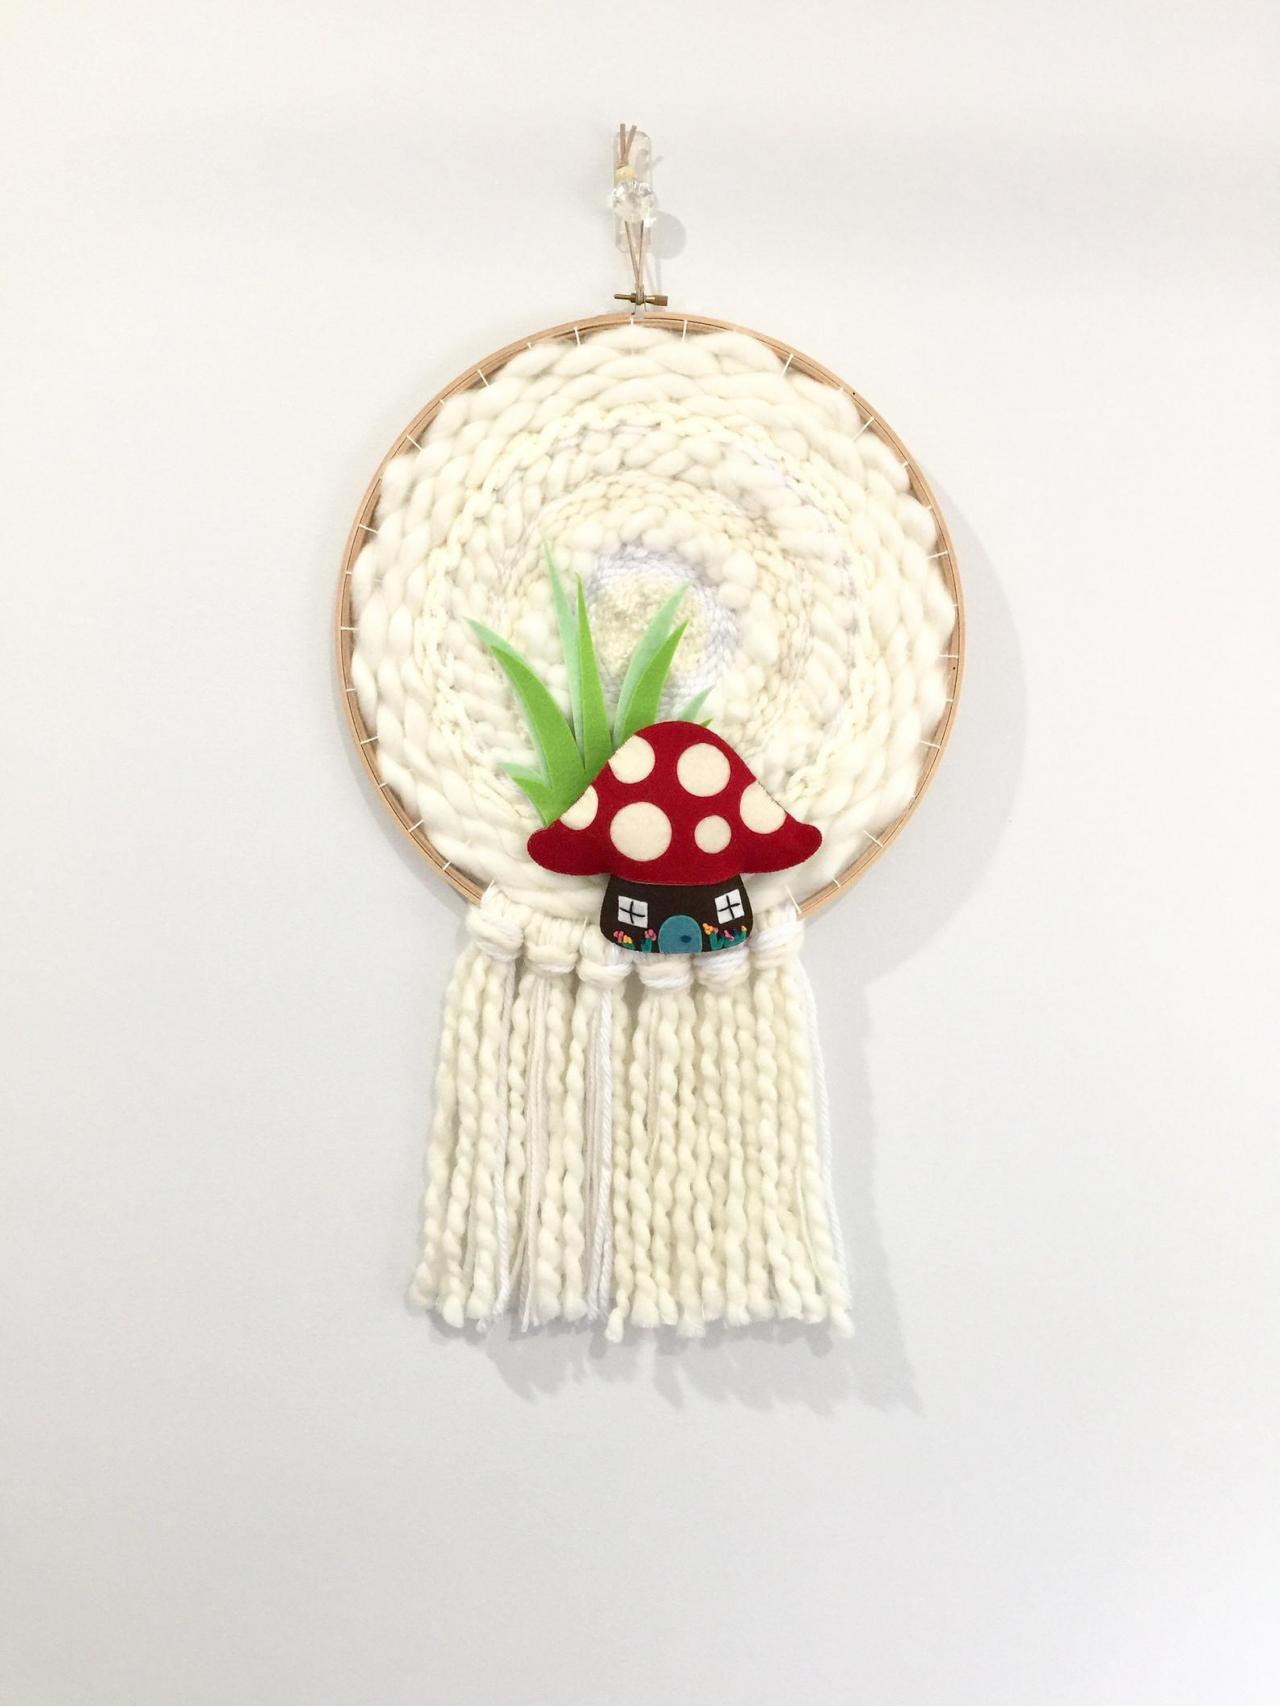 PRICE REDUCED ** Toad Stool House Round Woven Wall Hanging, Weaving, Wall Hanging, Nursery Art, Nursery Decor, White Weaving